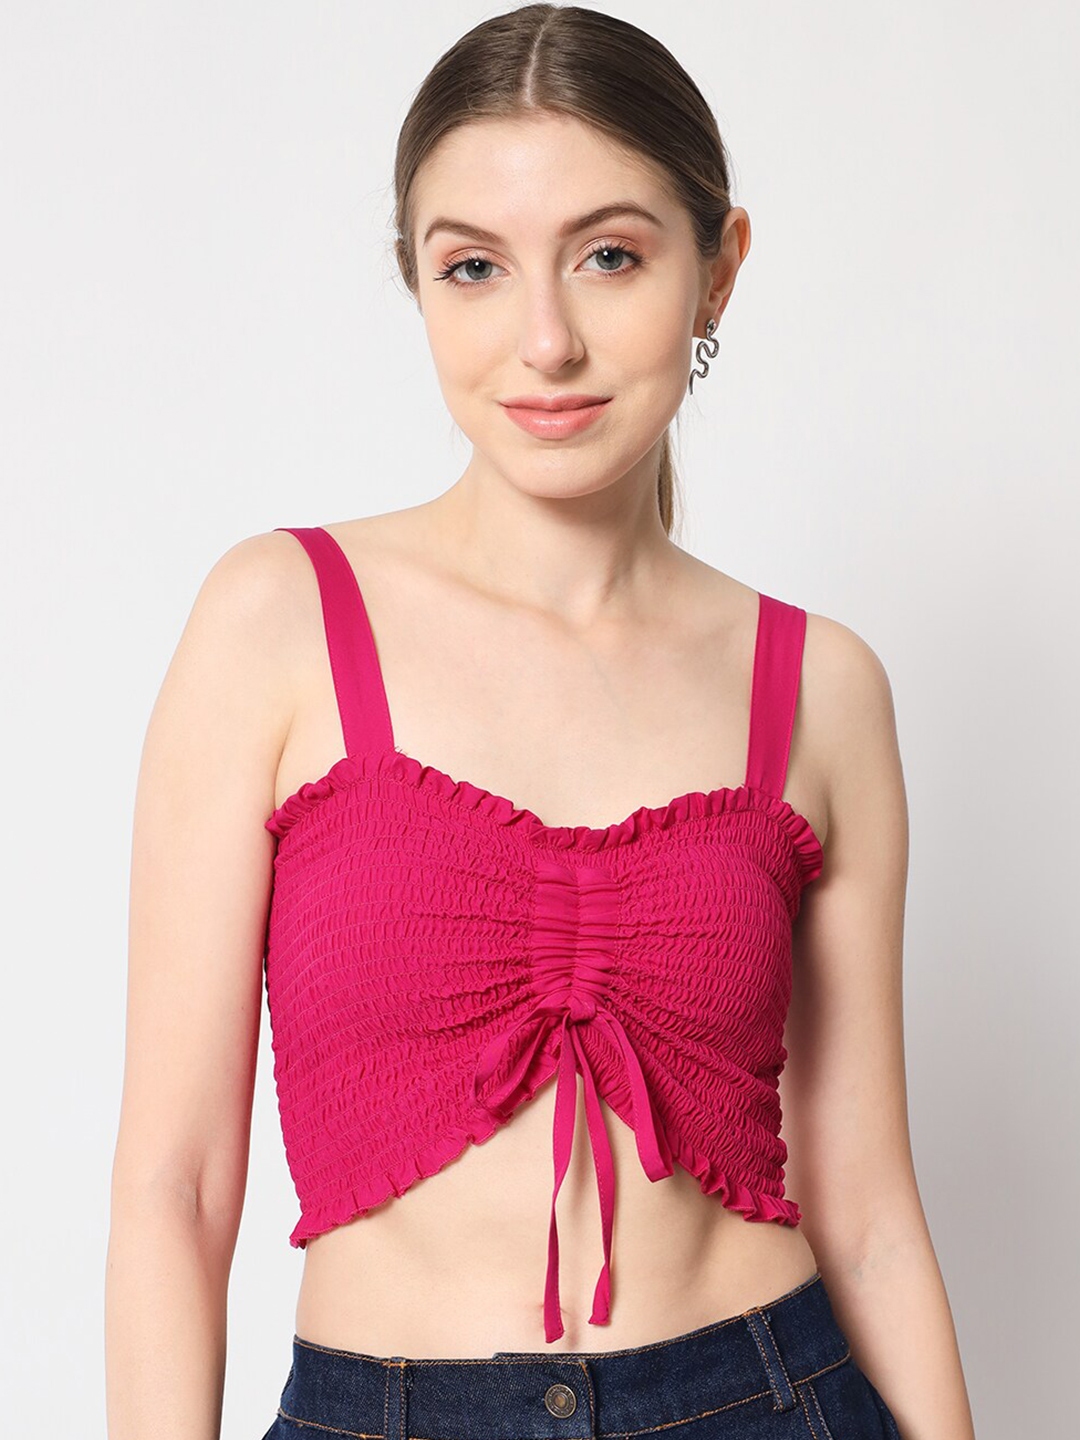 Sweetheart Bralette Top by 525 America for $30